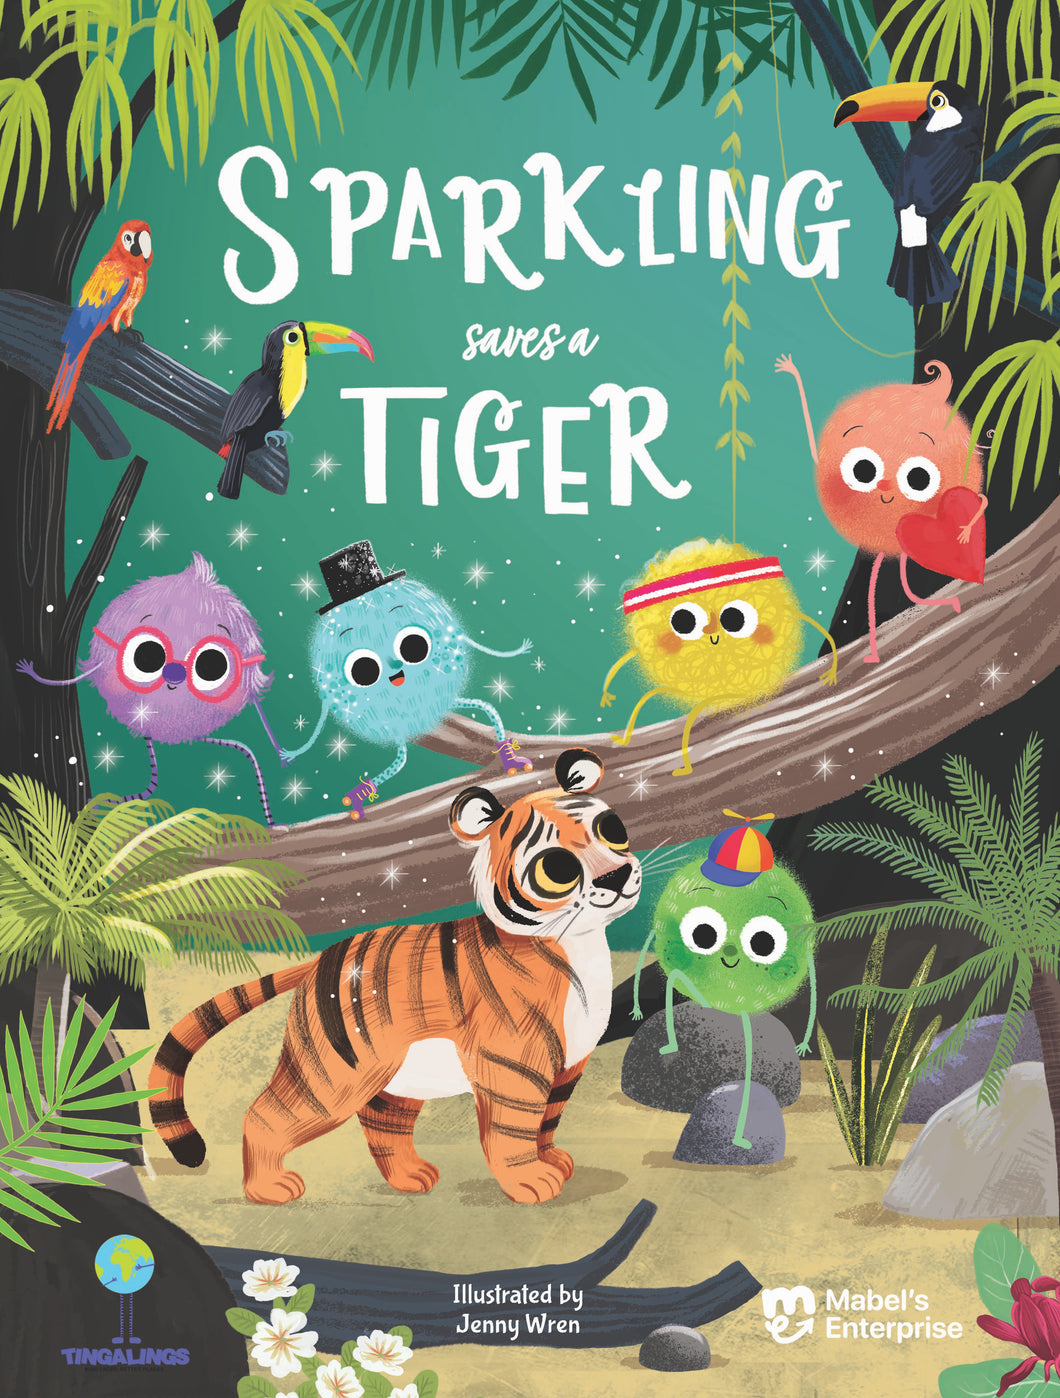 Childrens Book - Tigers, Deforestation and Climate Change